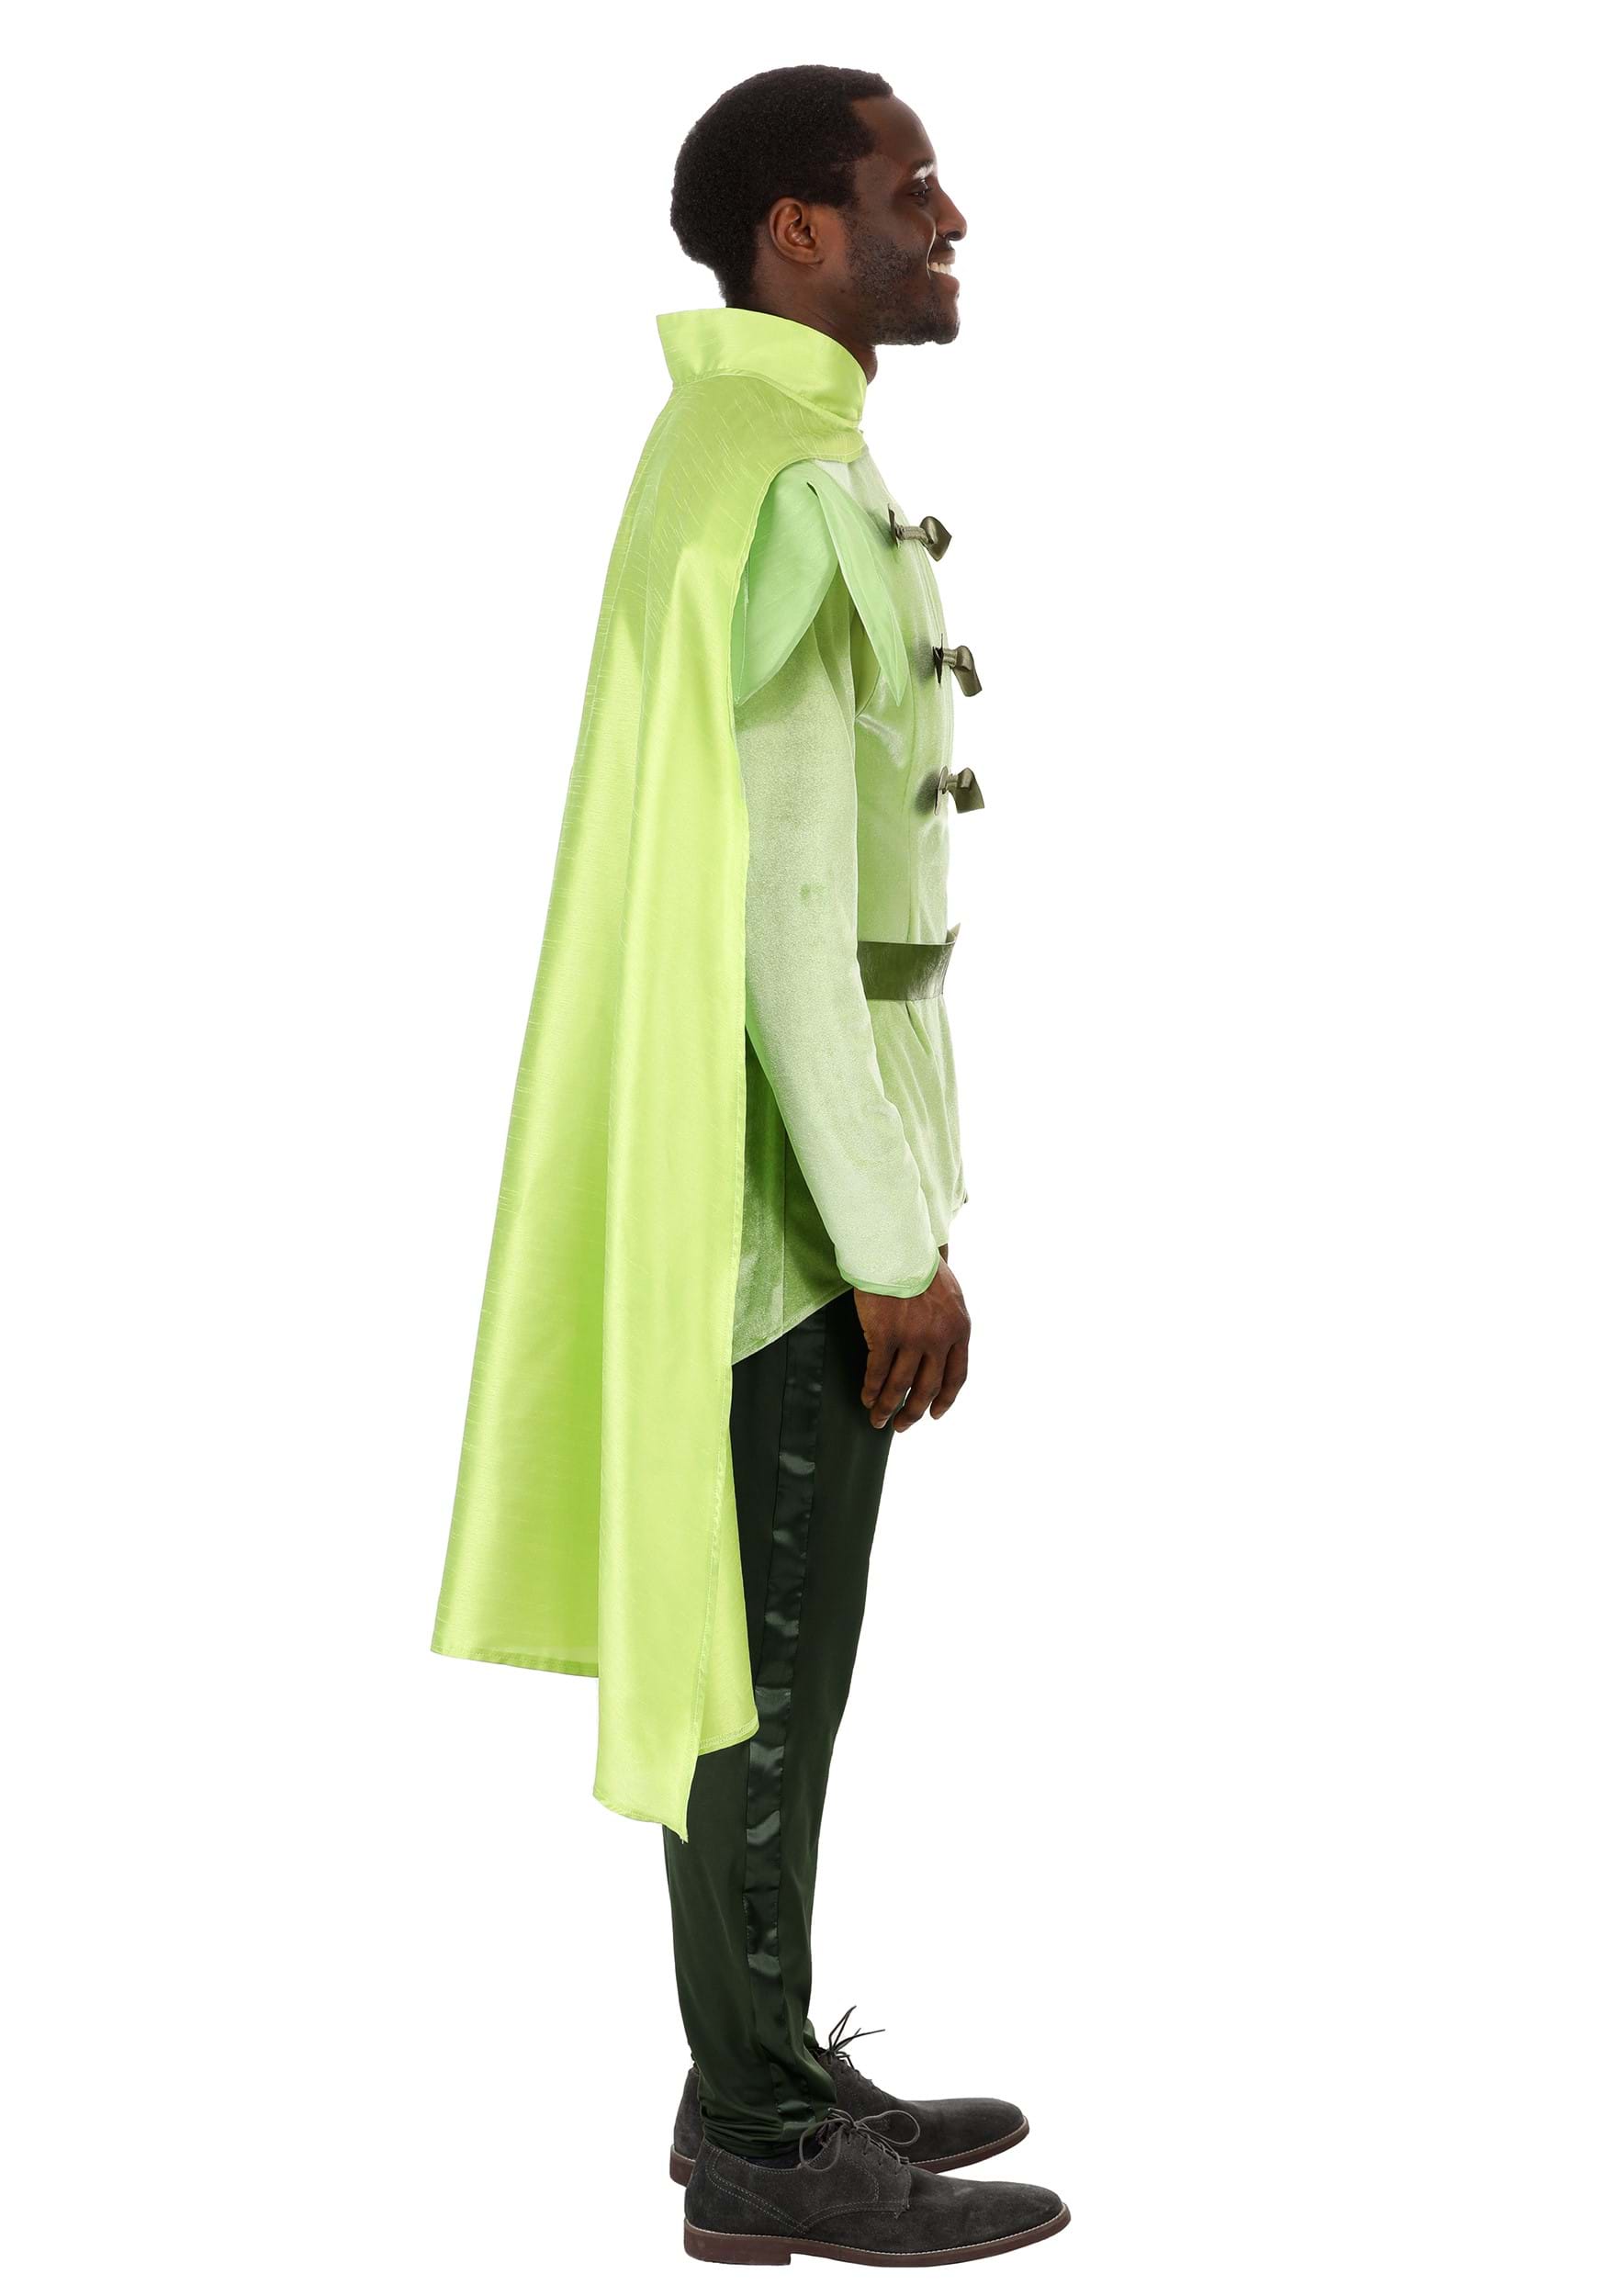 Disney Prince Naveen Costume for Adults